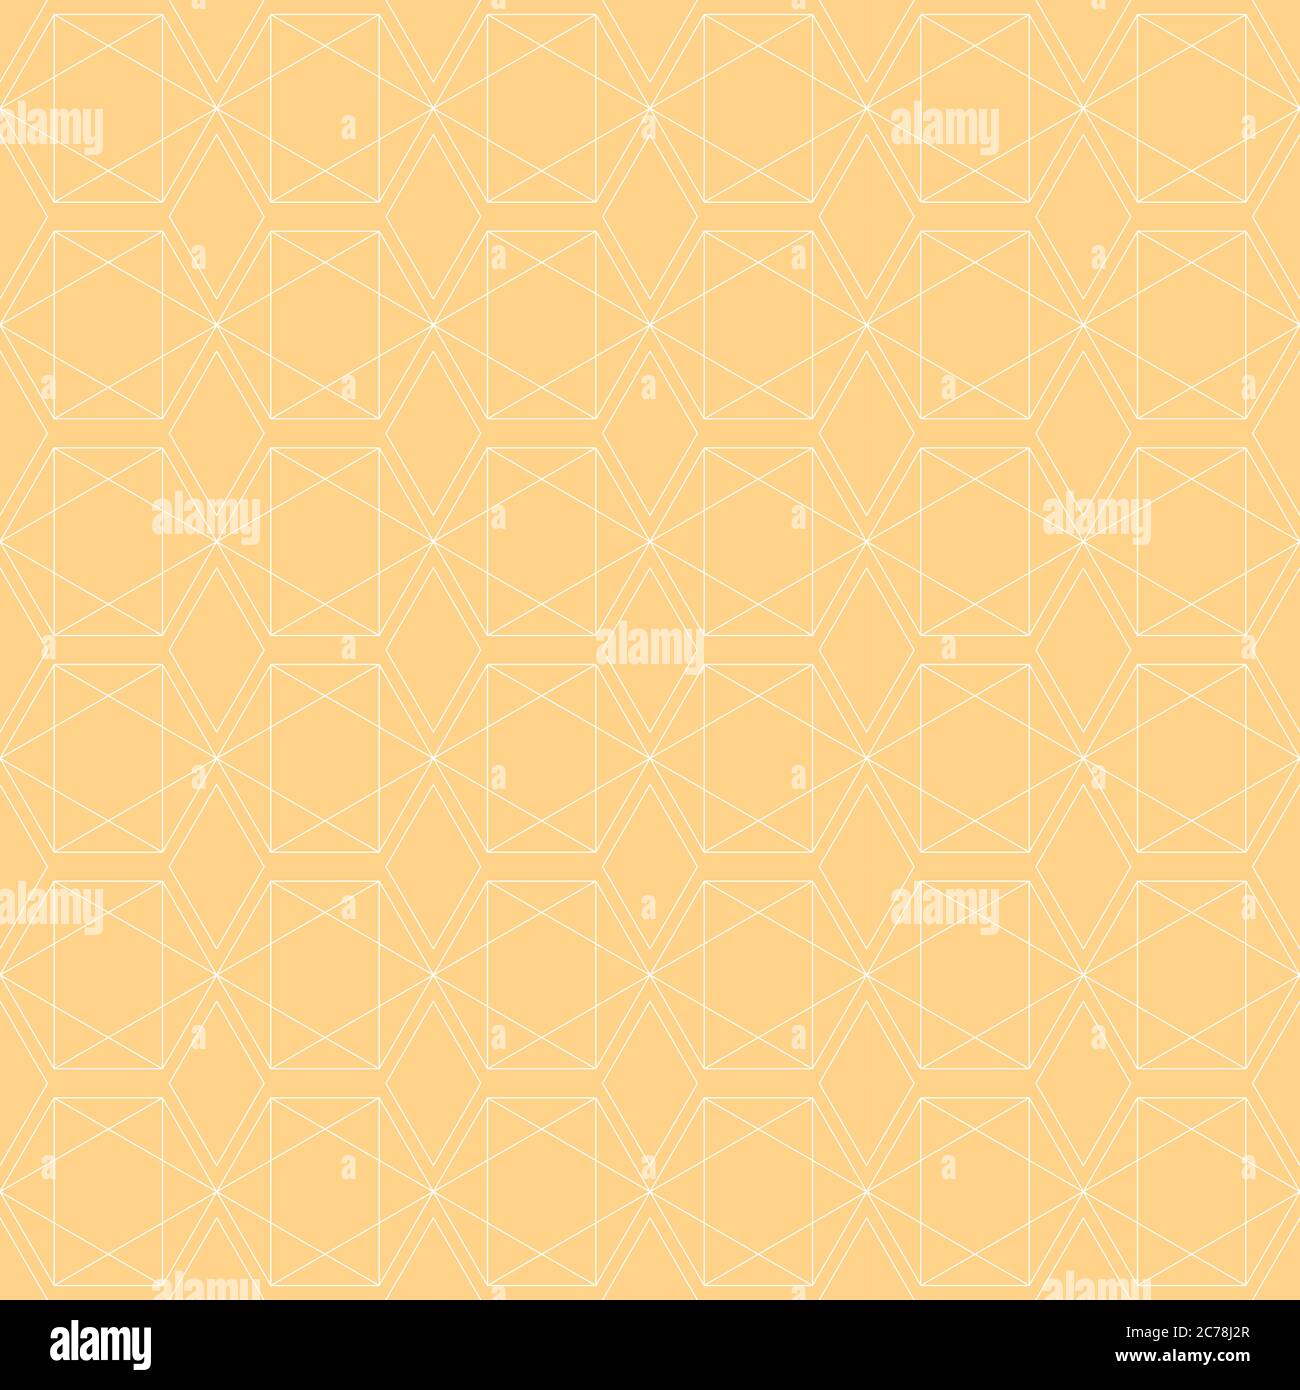 Geometric vector seamless pattern for bed cover,textile,cushion cover,phone case, home decor,fabric,home furnishings, wallpaper,curtain,tiles,etc. Stock Vector